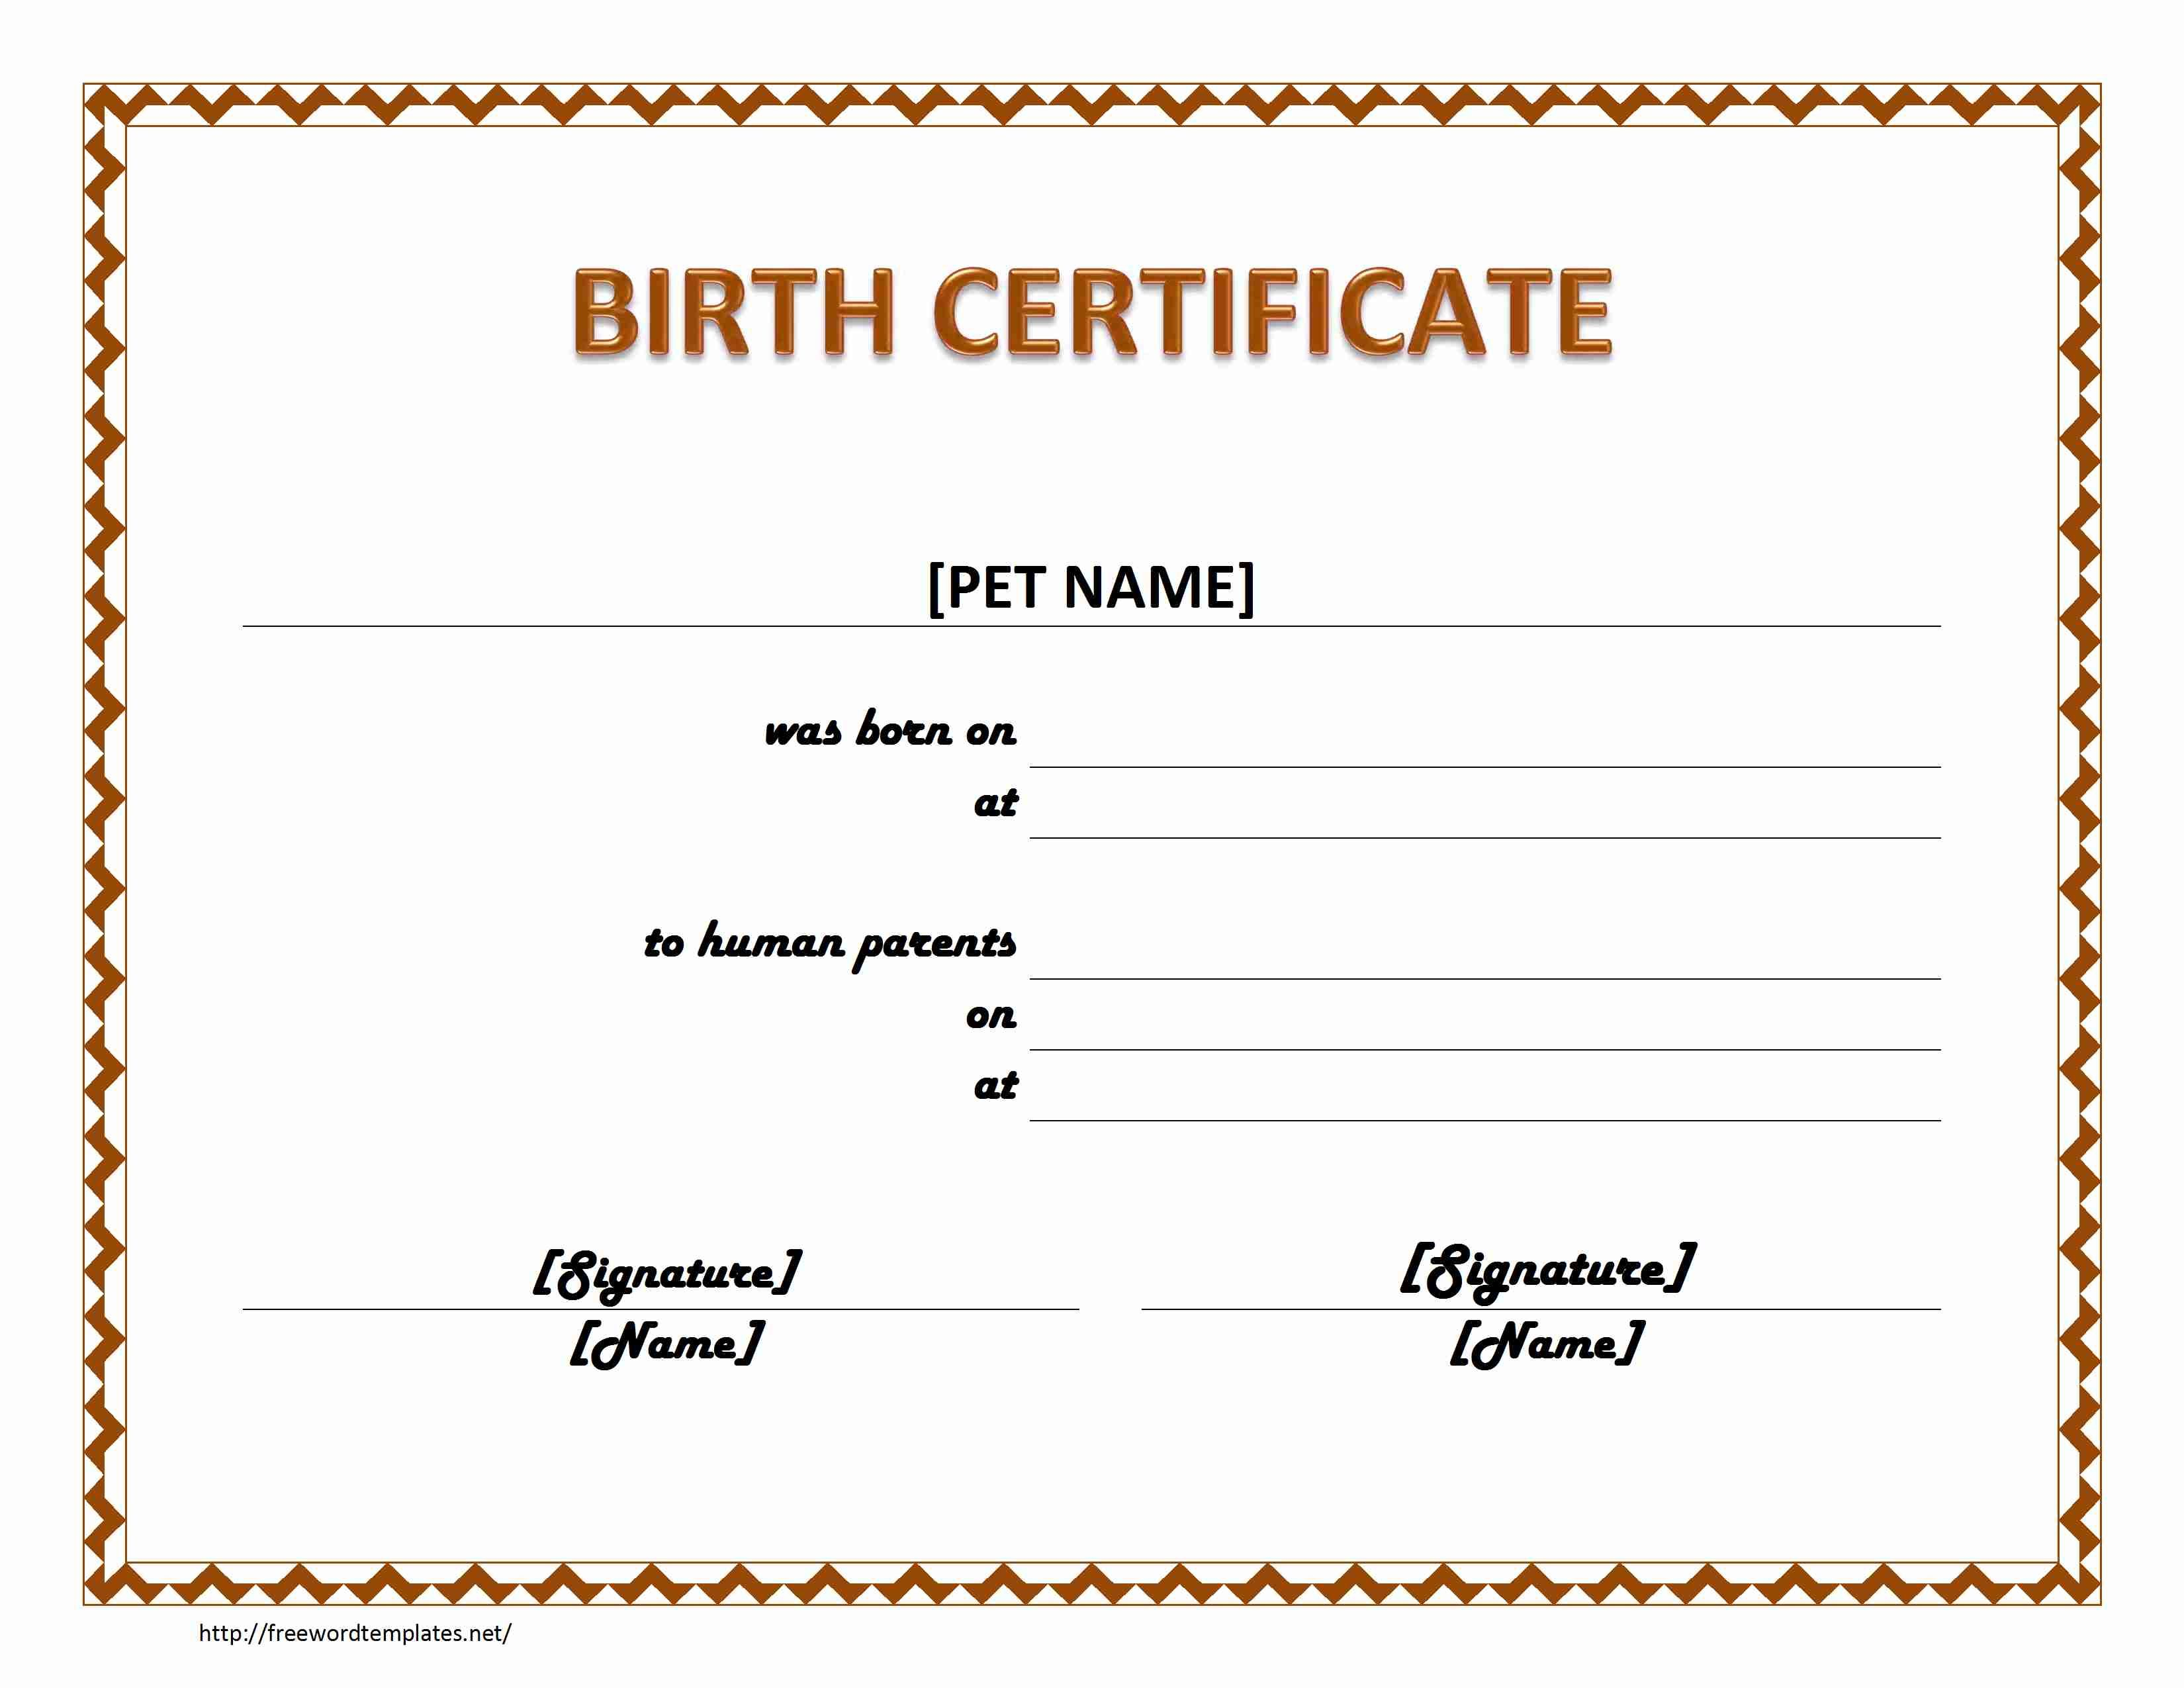 Pet Birth Certificate Maker | Pet Birth Certificate For Word Intended For Birth Certificate Templates For Word